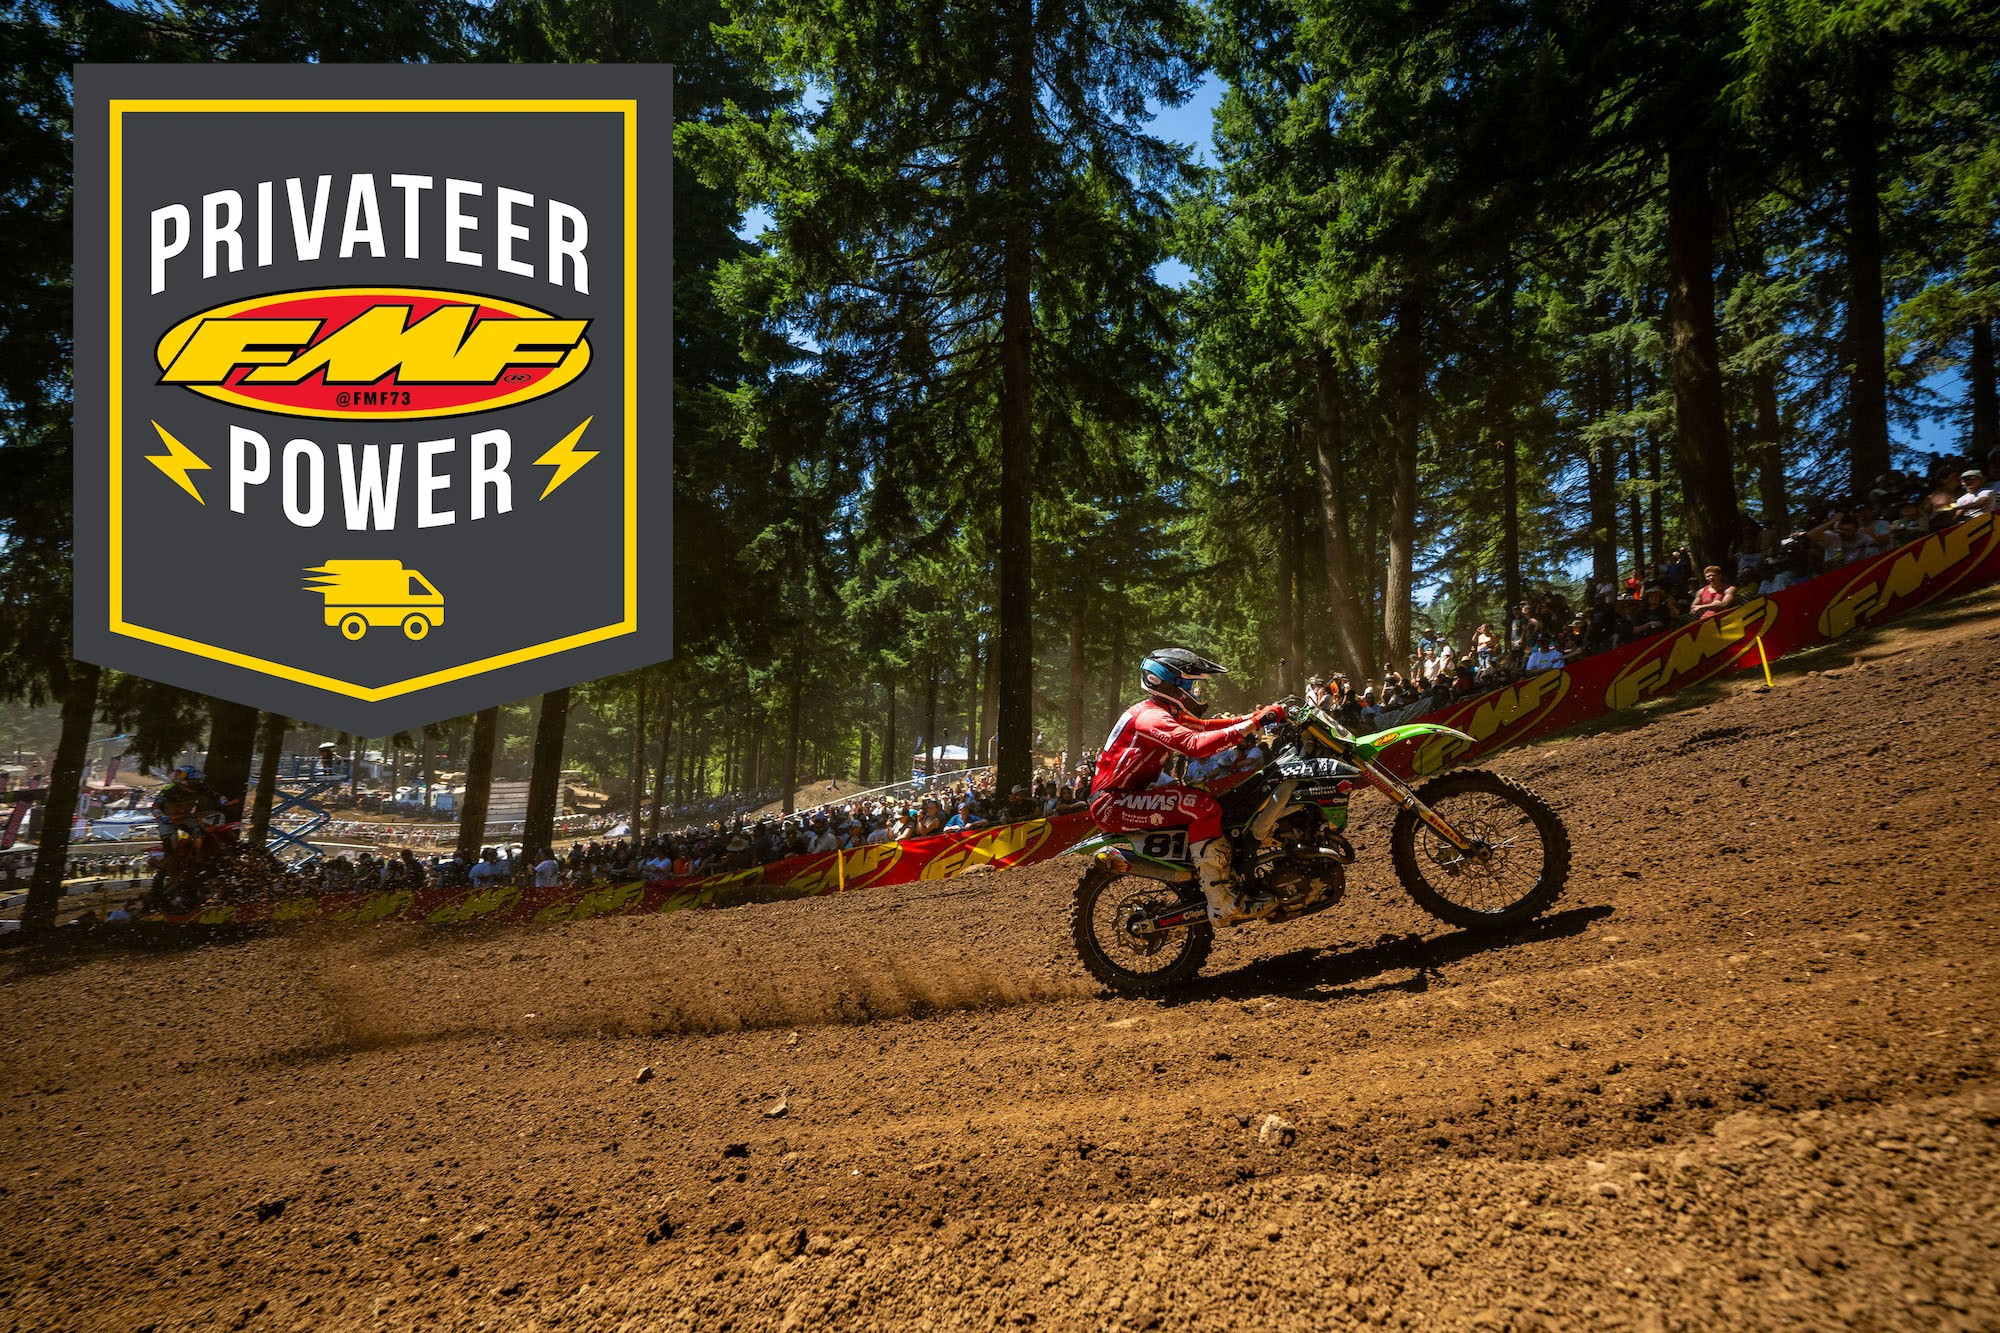 Last season, Ty Masterpool's breakout campaign made him a Privateer Power hero after he received the award multiple times over the course of the summer.